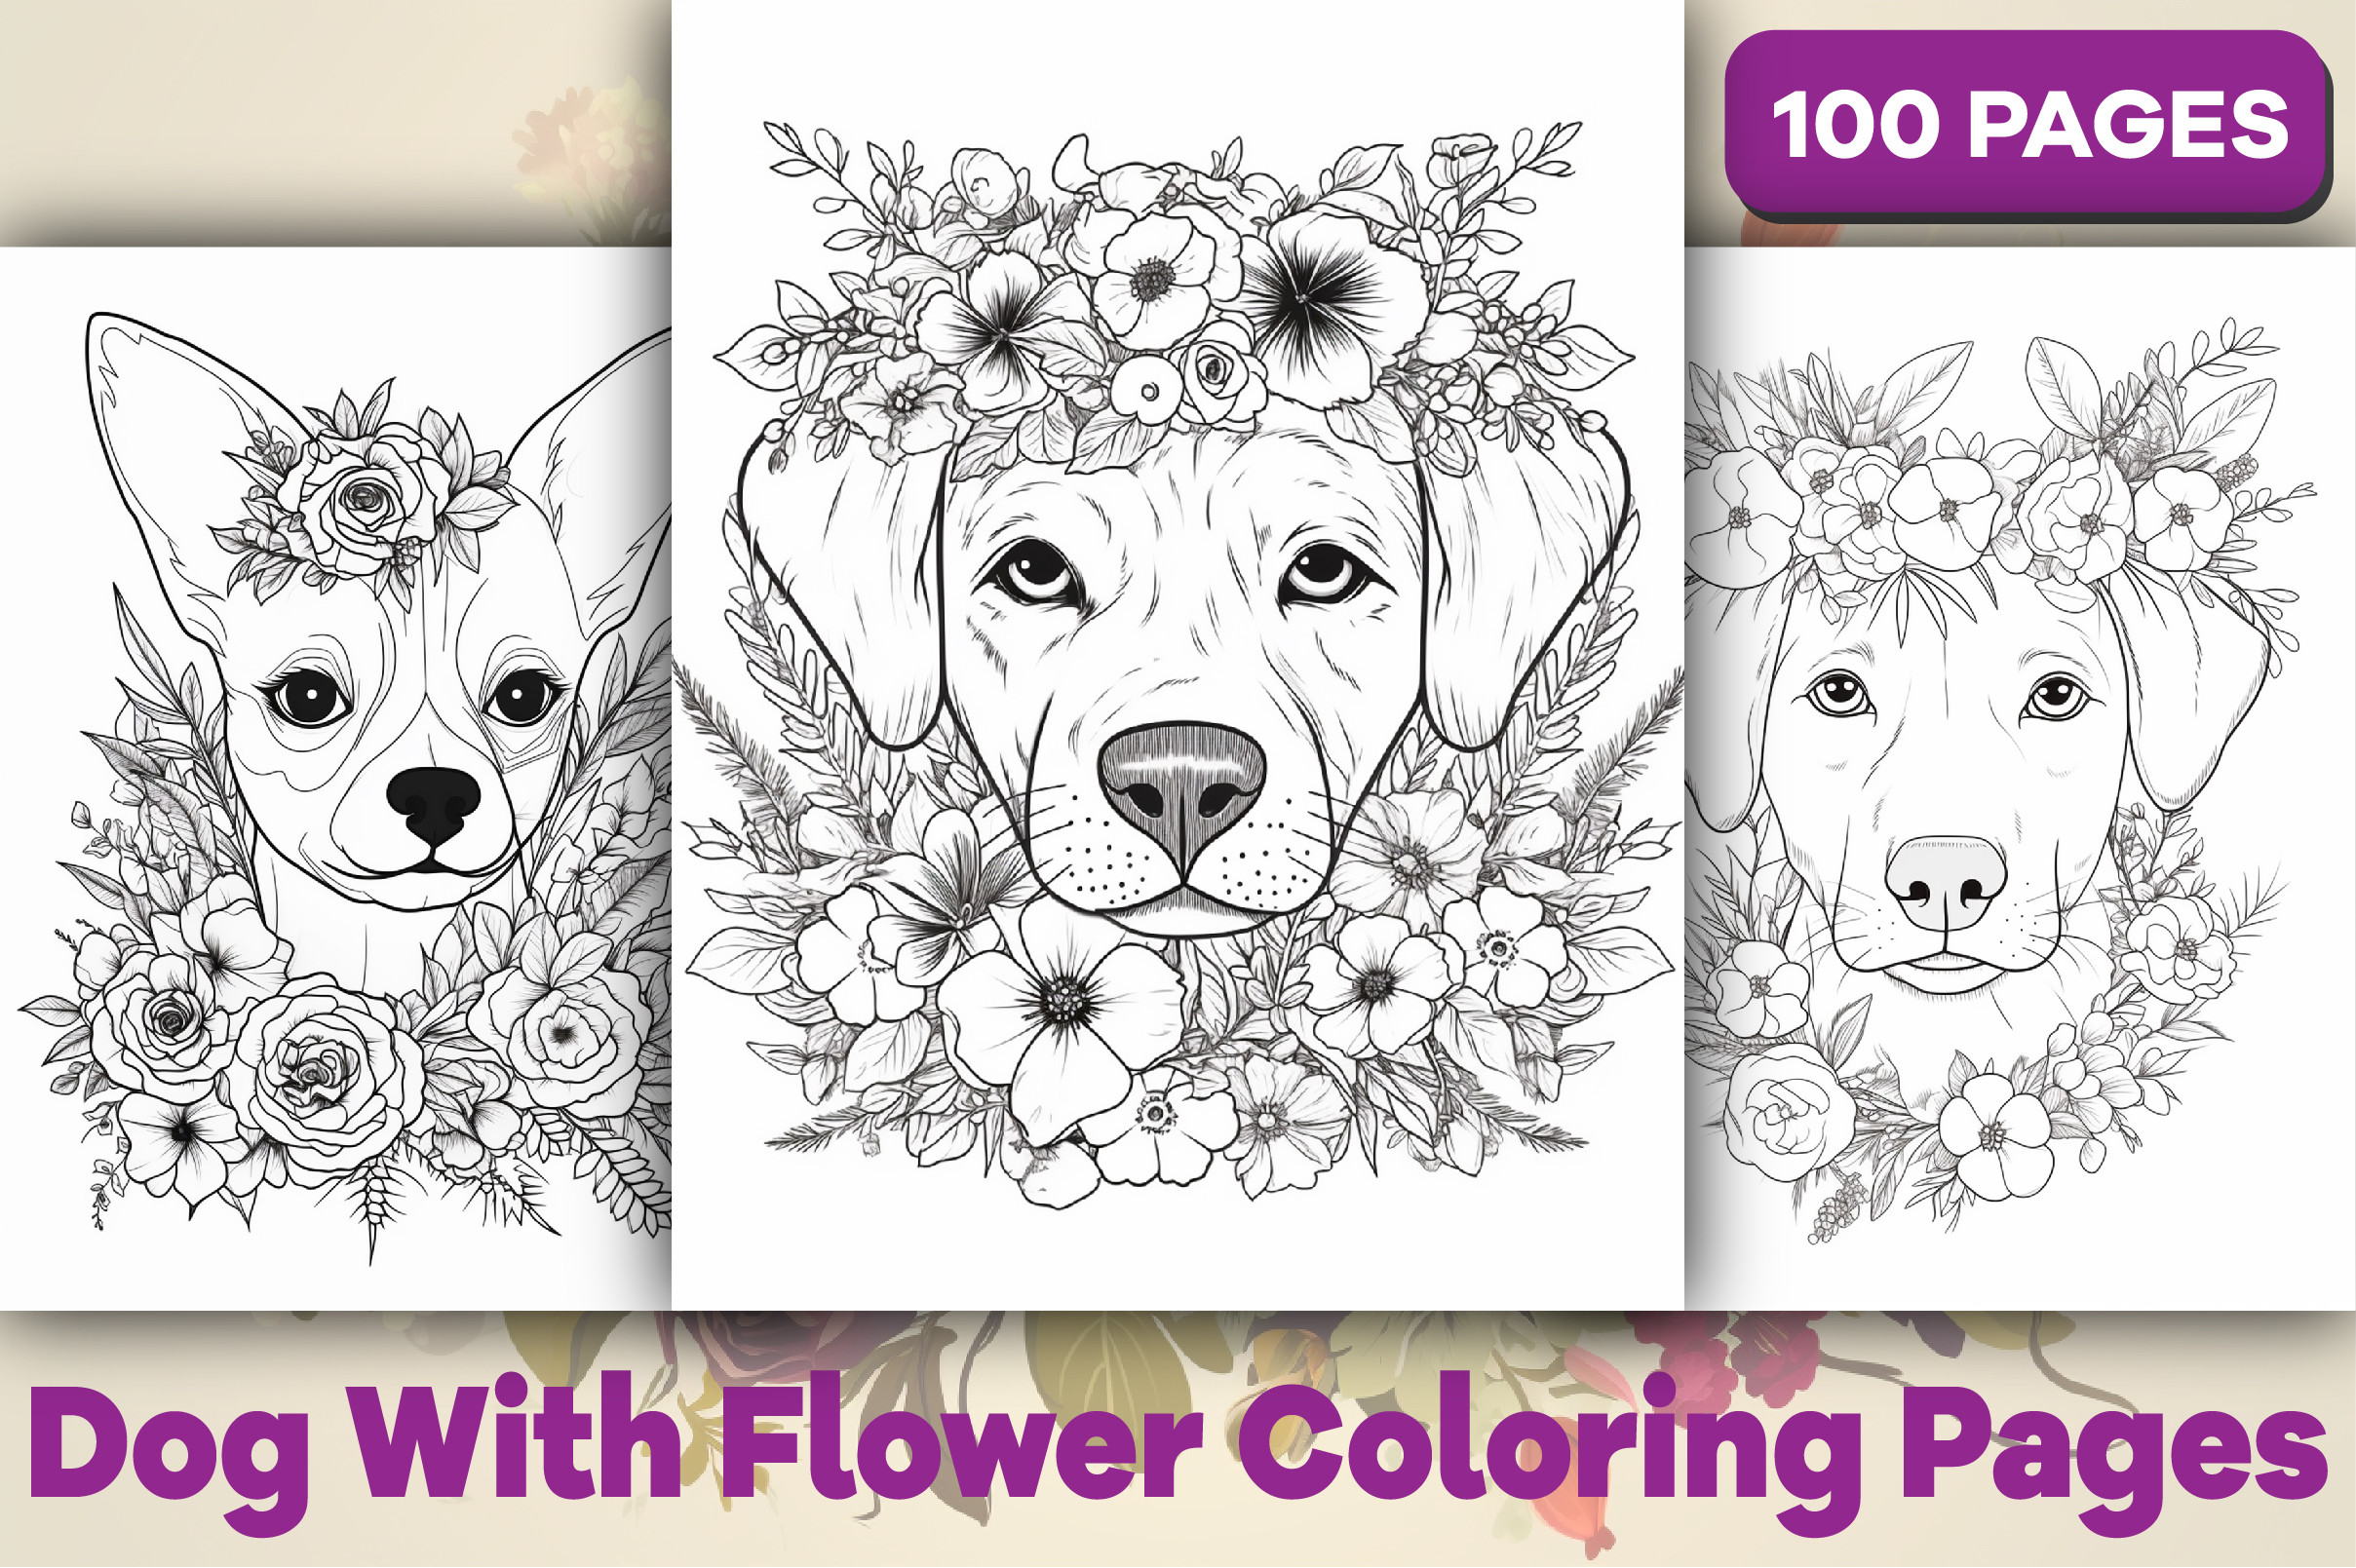 Stained Glass Coloring Book Flowers: Adult Colouring Book Flower